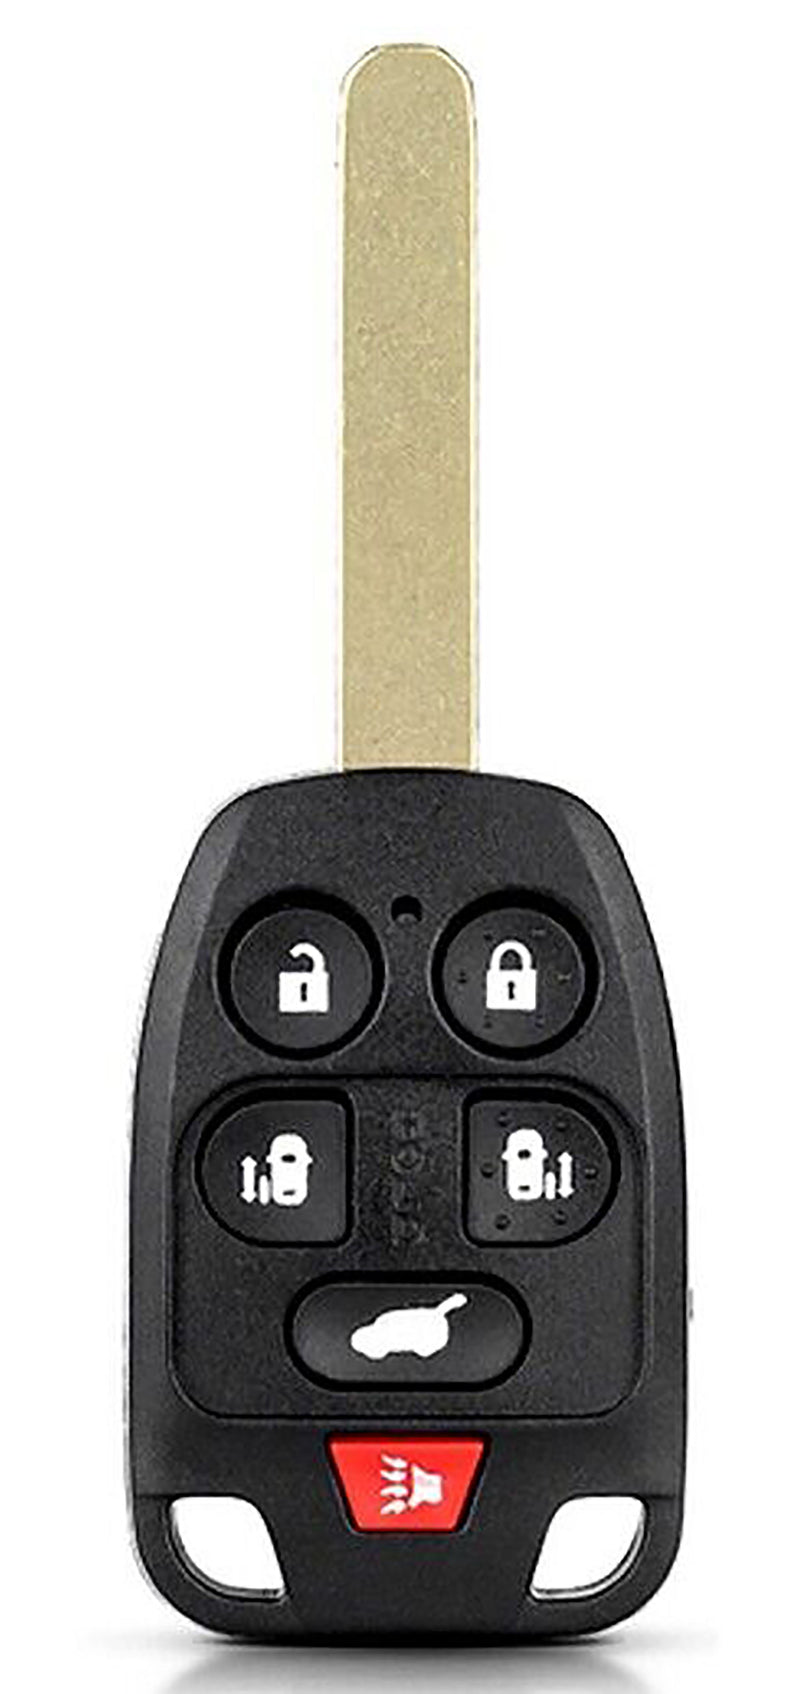 1x New Replacement Key Fob Compatible with & Fit For 2011 2012 2013 Honda Odyssey 315 MHz - MPN N5F-A04TAA-02